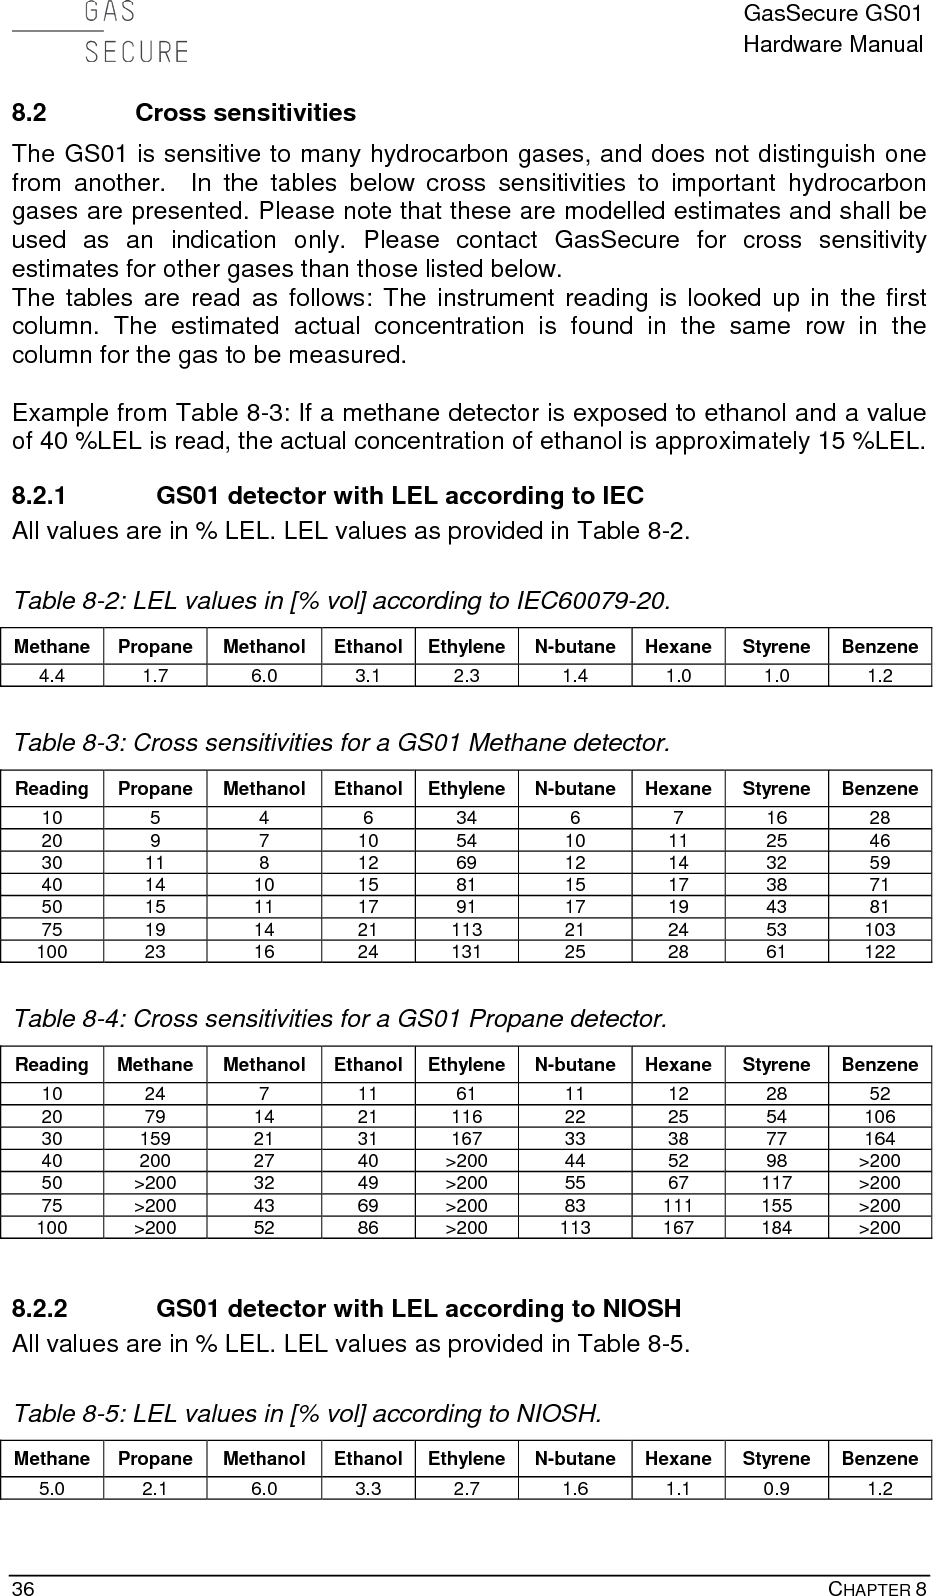  GasSecure GS01 Hardware Manual  36    CHAPTER 8   8.2 Cross sensitivities The GS01 is sensitive to many hydrocarbon gases, and does not distinguish one from another.  In the tables below cross sensitivities to important  hydrocarbon gases are presented. Please note that these are modelled estimates and shall be used as an indication only. Please contact GasSecure for cross sensitivity estimates for other gases than those listed below. The tables are read as follows: The instrument reading is looked up in the first column. The estimated actual concentration is found in the same row in the column for the gas to be measured.  Example from Table 8-3: If a methane detector is exposed to ethanol and a value of 40 %LEL is read, the actual concentration of ethanol is approximately 15 %LEL. 8.2.1 GS01 detector with LEL according to IEC All values are in % LEL. LEL values as provided in Table 8-2.  Table 8-2: LEL values in [% vol] according to IEC60079-20.    Methane Propane Methanol Ethanol Ethylene N-butane Hexane Styrene Benzene 4.4 1.7 6.0 3.1 2.3 1.4 1.0 1.0 1.2  Table 8-3: Cross sensitivities for a GS01 Methane detector. Reading Propane Methanol Ethanol  Ethylene  N-butane Hexane  Styrene  Benzene 10 5 4 6 34 6 7 16 28 20 9 7 10 54 10 11 25 46 30 11 8 12 69 12 14 32 59 40 14 10 15 81 15 17 38 71 50 15 11 17 91 17 19 43 81 75 19 14 21 113 21 24 53 103 100 23 16 24 131 25 28 61 122  Table 8-4: Cross sensitivities for a GS01 Propane detector. Reading Methane Methanol Ethanol  Ethylene  N-butane Hexane  Styrene  Benzene 10 24 7 11 61 11 12 28 52 20 79 14 21 116 22 25 54 106 30 159 21 31 167 33 38 77 164 40 200 27 40 &gt;200 44 52 98 &gt;200 50 &gt;200 32 49 &gt;200 55 67 117 &gt;200 75 &gt;200 43 69 &gt;200 83 111 155 &gt;200 100 &gt;200 52 86 &gt;200 113 167 184 &gt;200  8.2.2 GS01 detector with LEL according to NIOSH All values are in % LEL. LEL values as provided in Table 8-5.  Table 8-5: LEL values in [% vol] according to NIOSH.    Methane Propane Methanol Ethanol Ethylene N-butane Hexane Styrene Benzene 5.0 2.1 6.0 3.3 2.7 1.6 1.1 0.9 1.2 